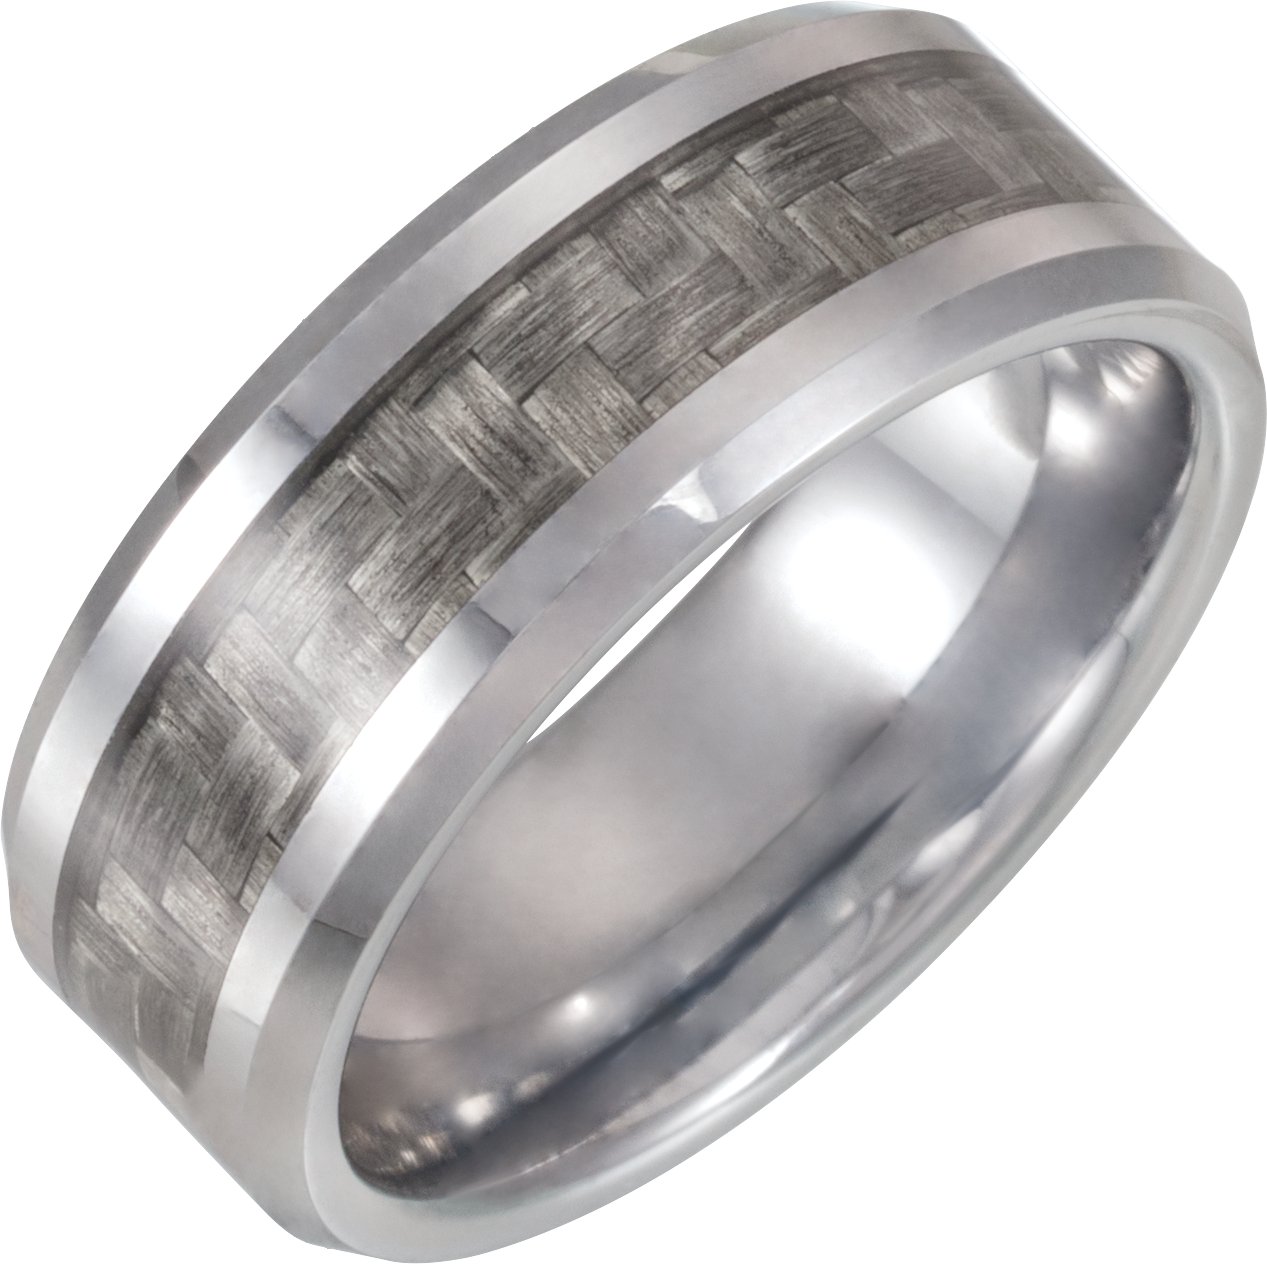 Tungsten 8 mm Band with Carbon Fiber Inlay Size 9.5